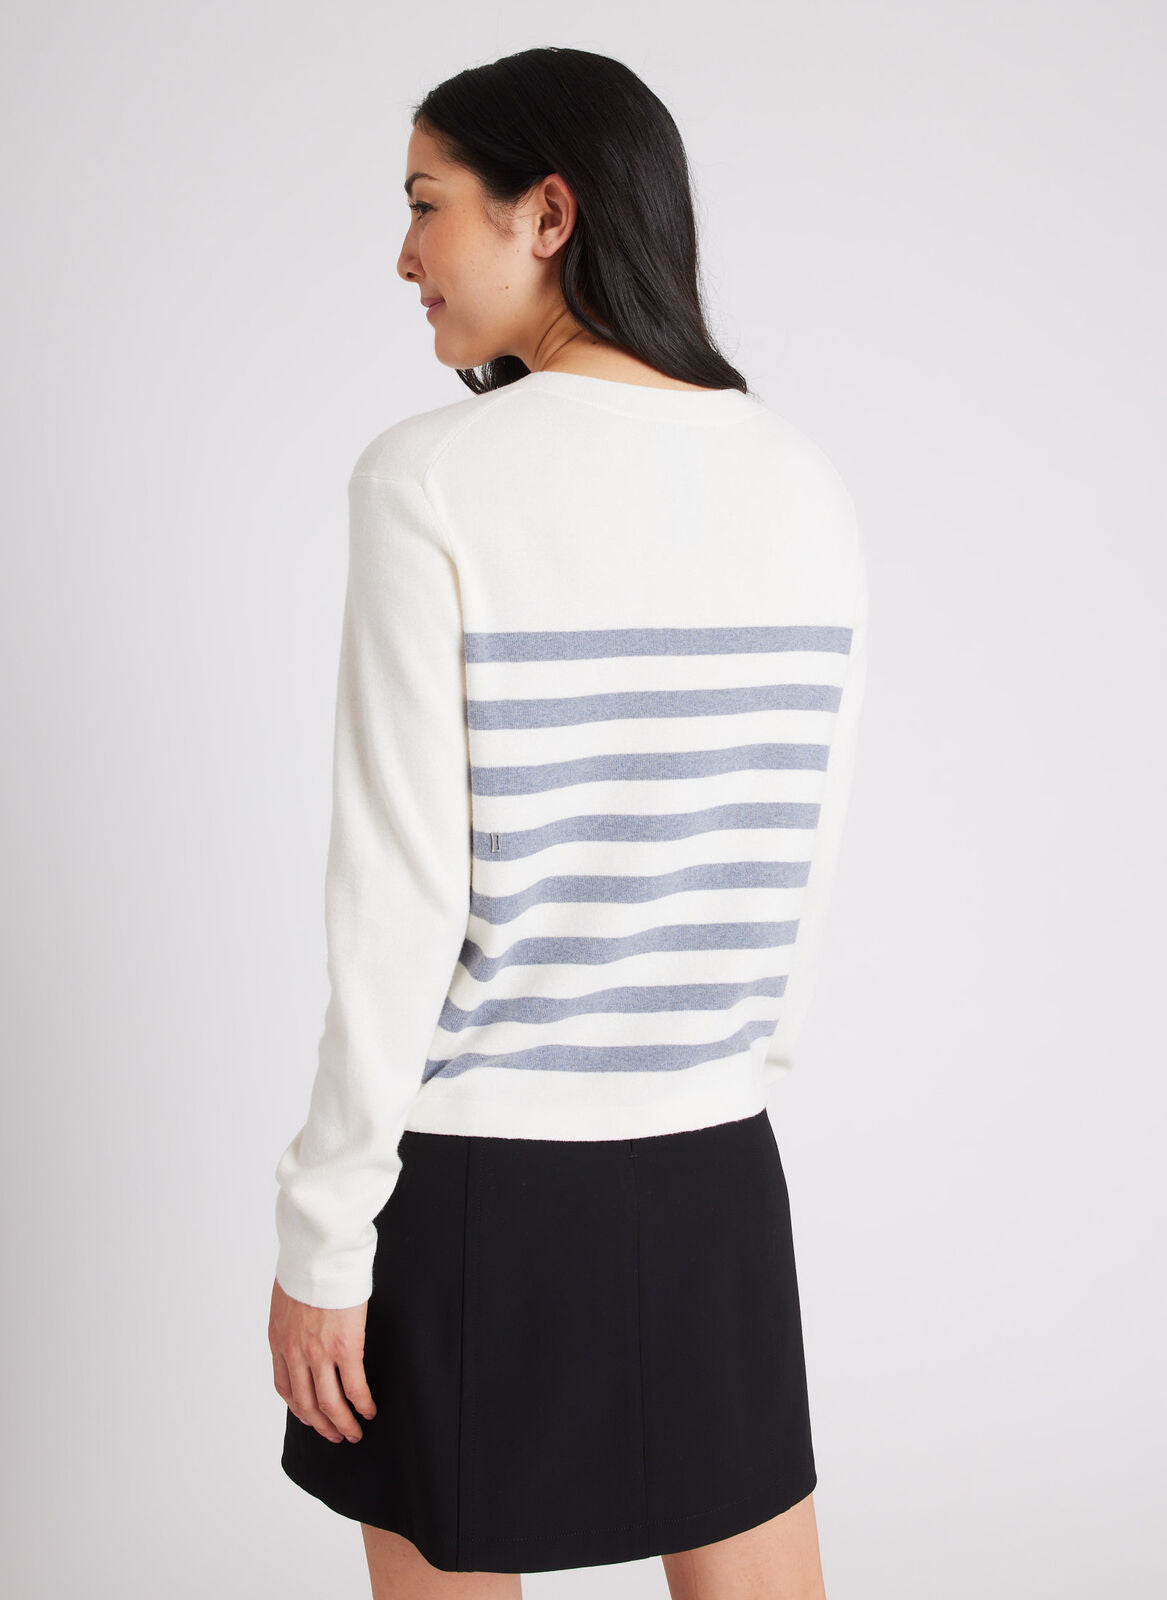 Kit and Ace — Starling Striped Sweater